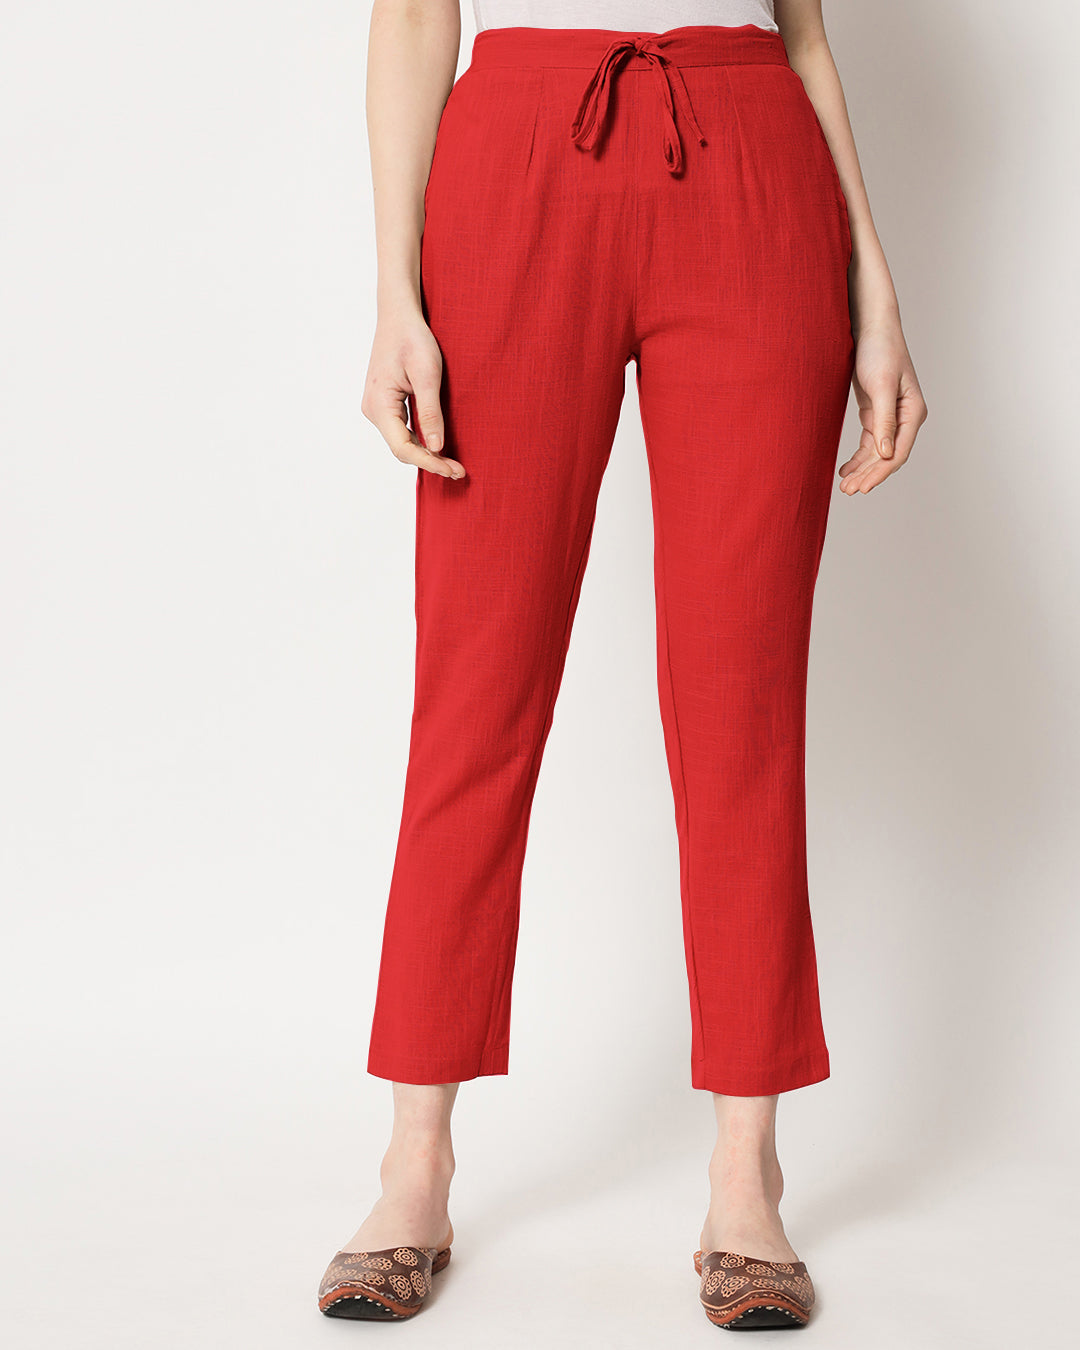 Combo: Classic Red & Iced Grey Cigarette Pants- Set of 2